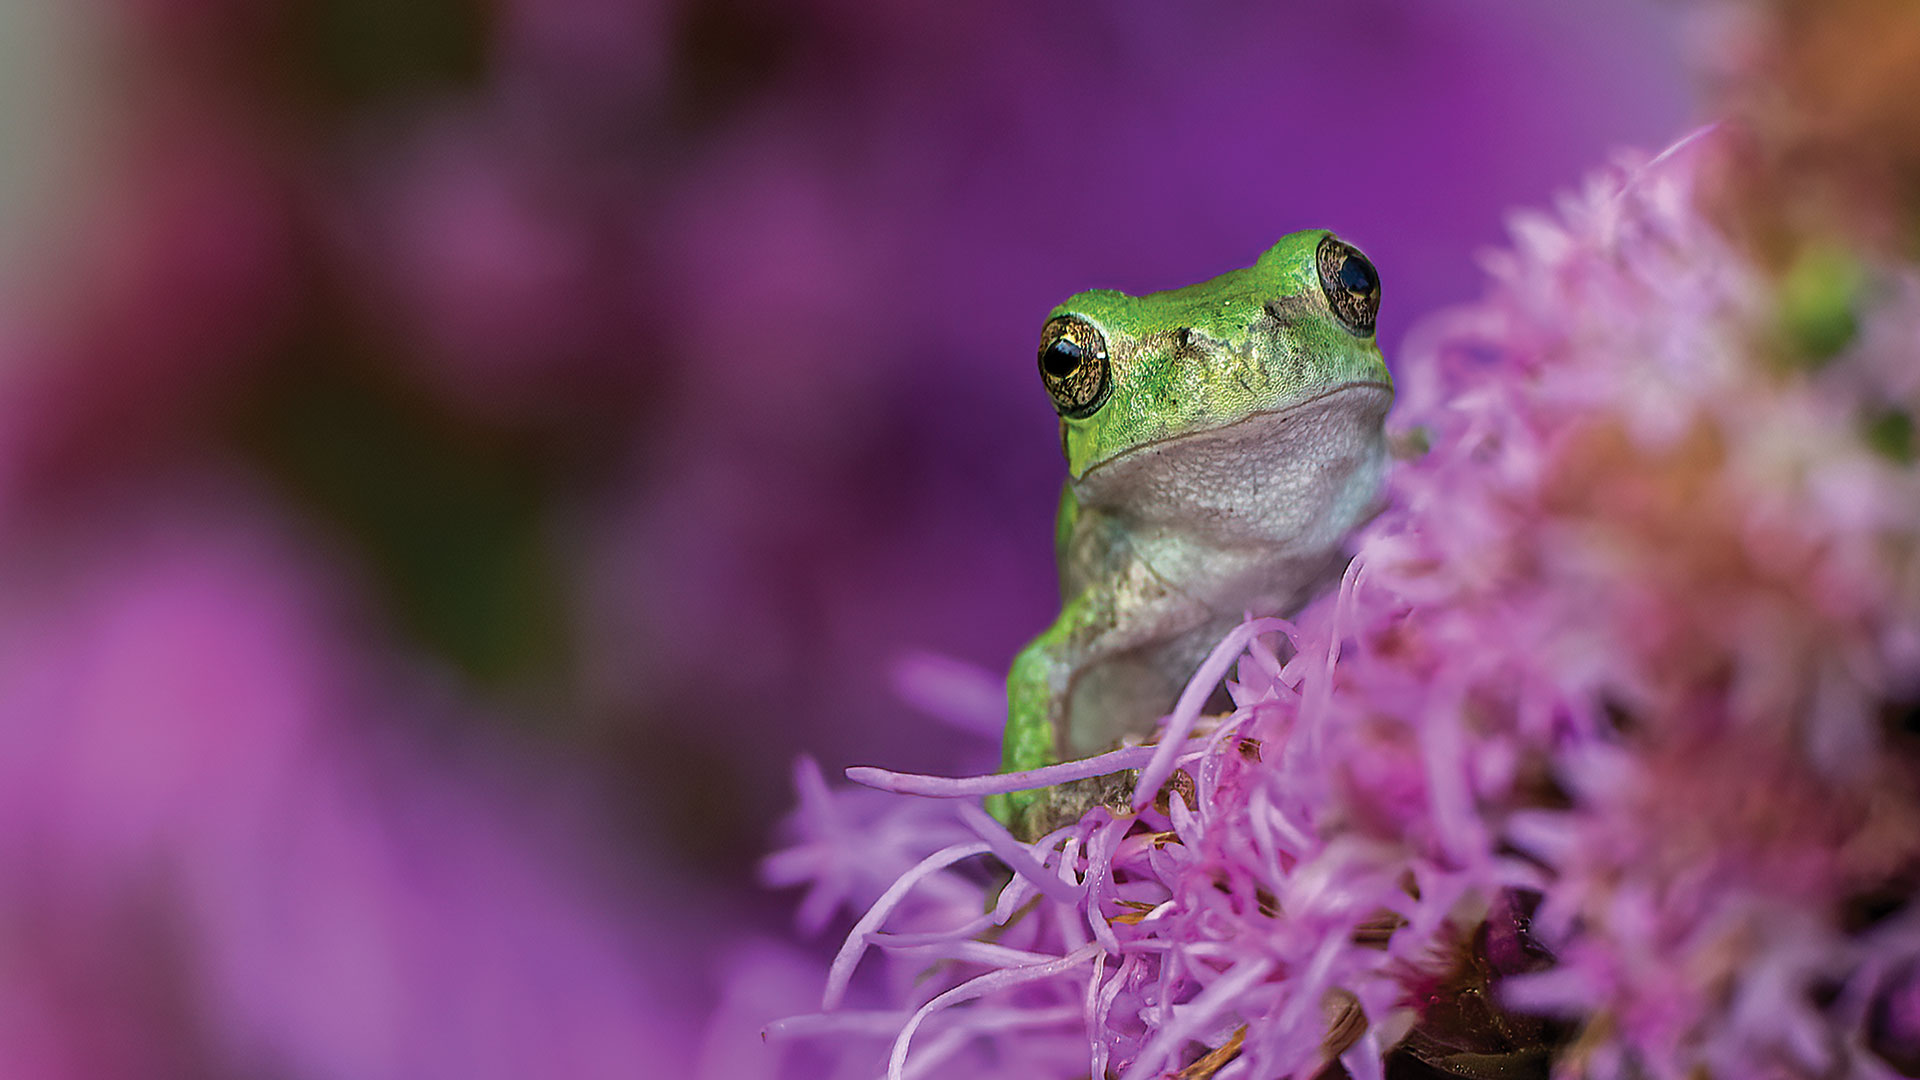 Spotted: The Gray Tree Frog - Nature Canada